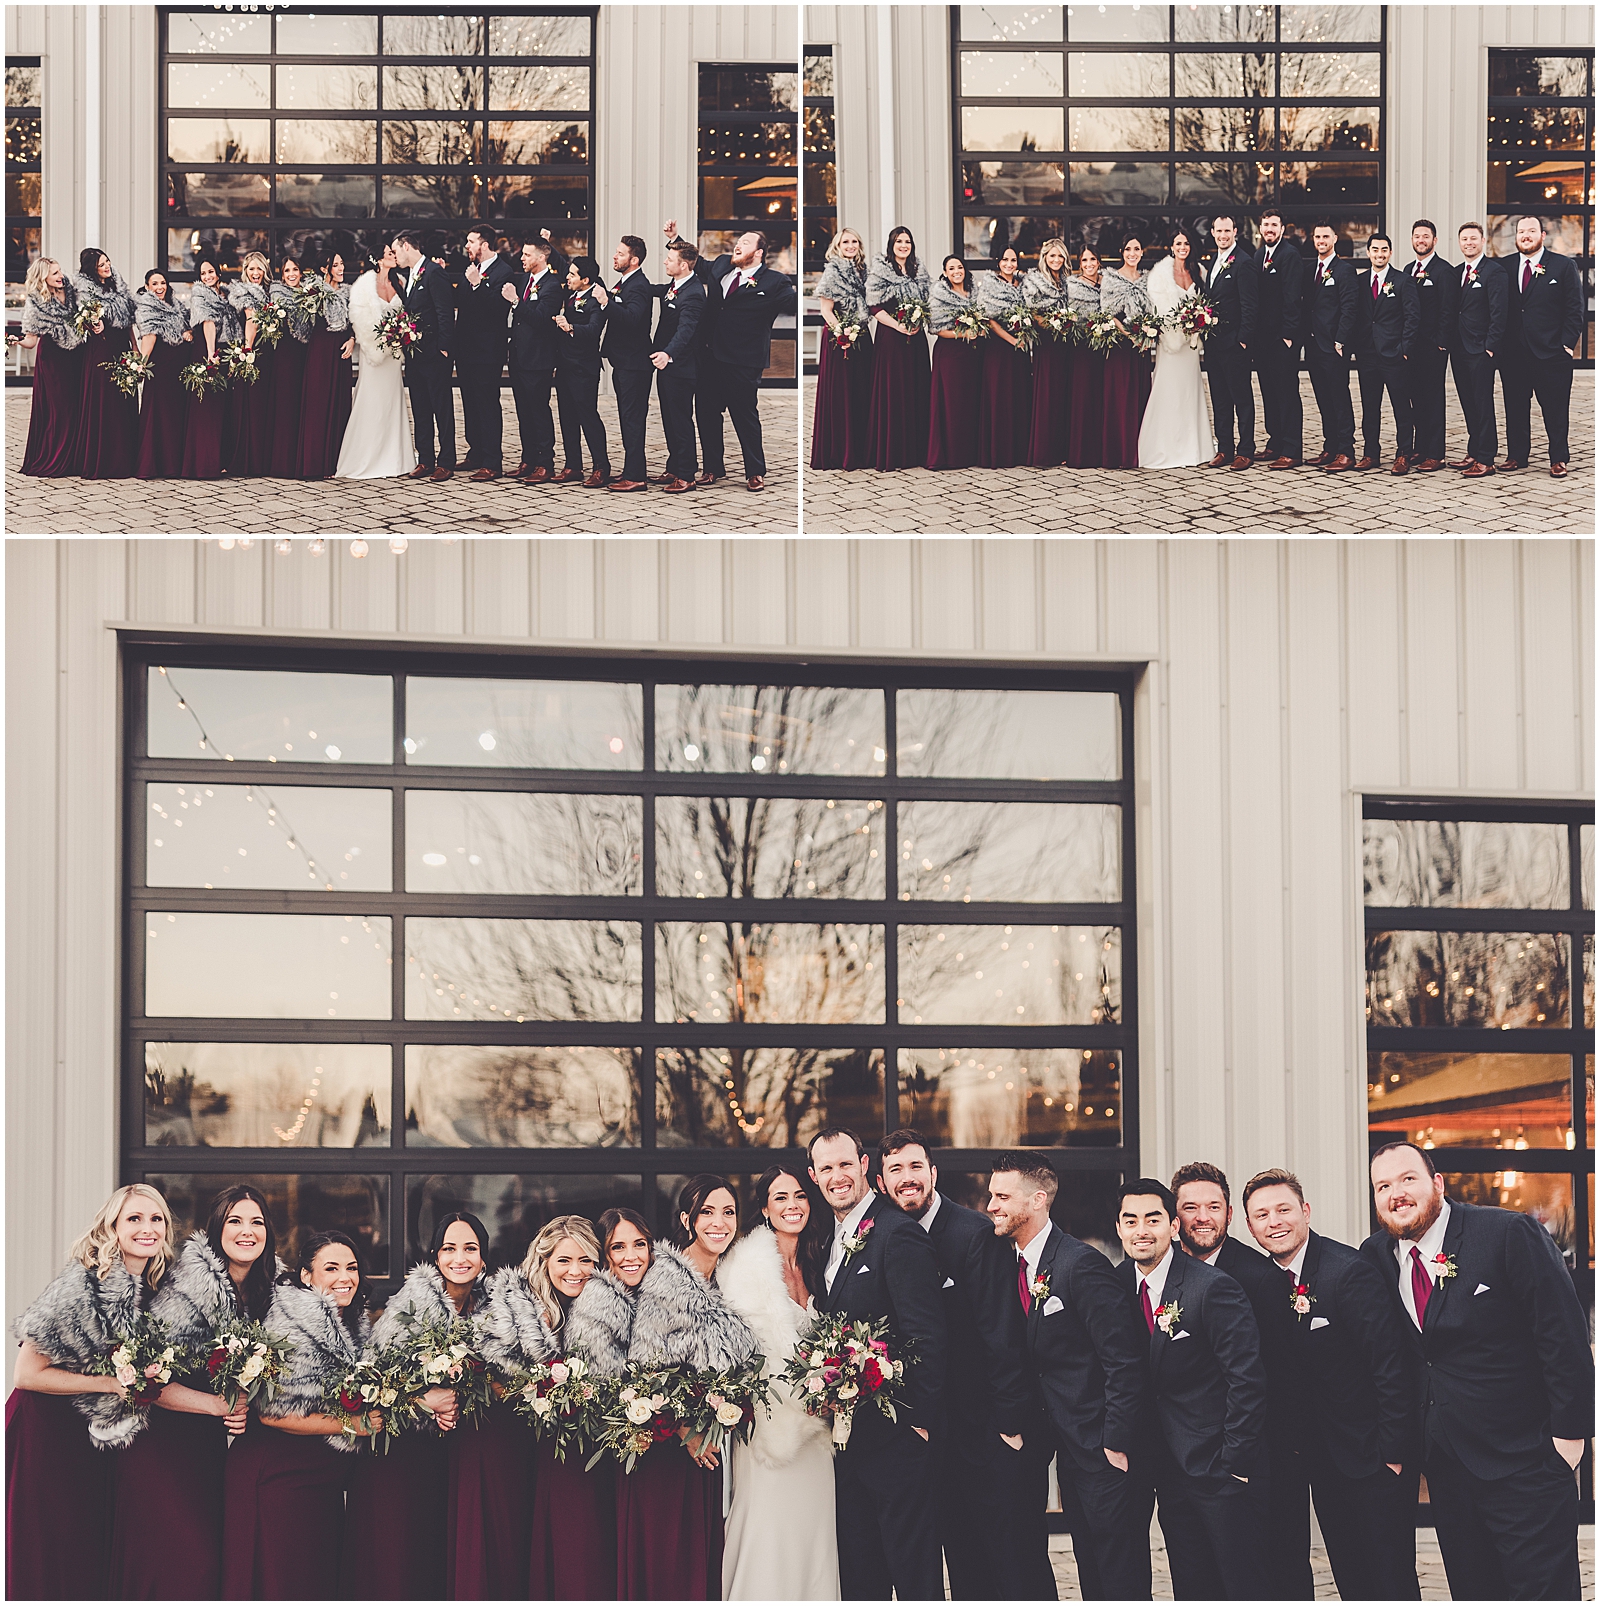 Jen and Tom's winter wedding at CD&ME in Frankfort, IL with Chicagoland wedding photographer Kara Evans Photographer.